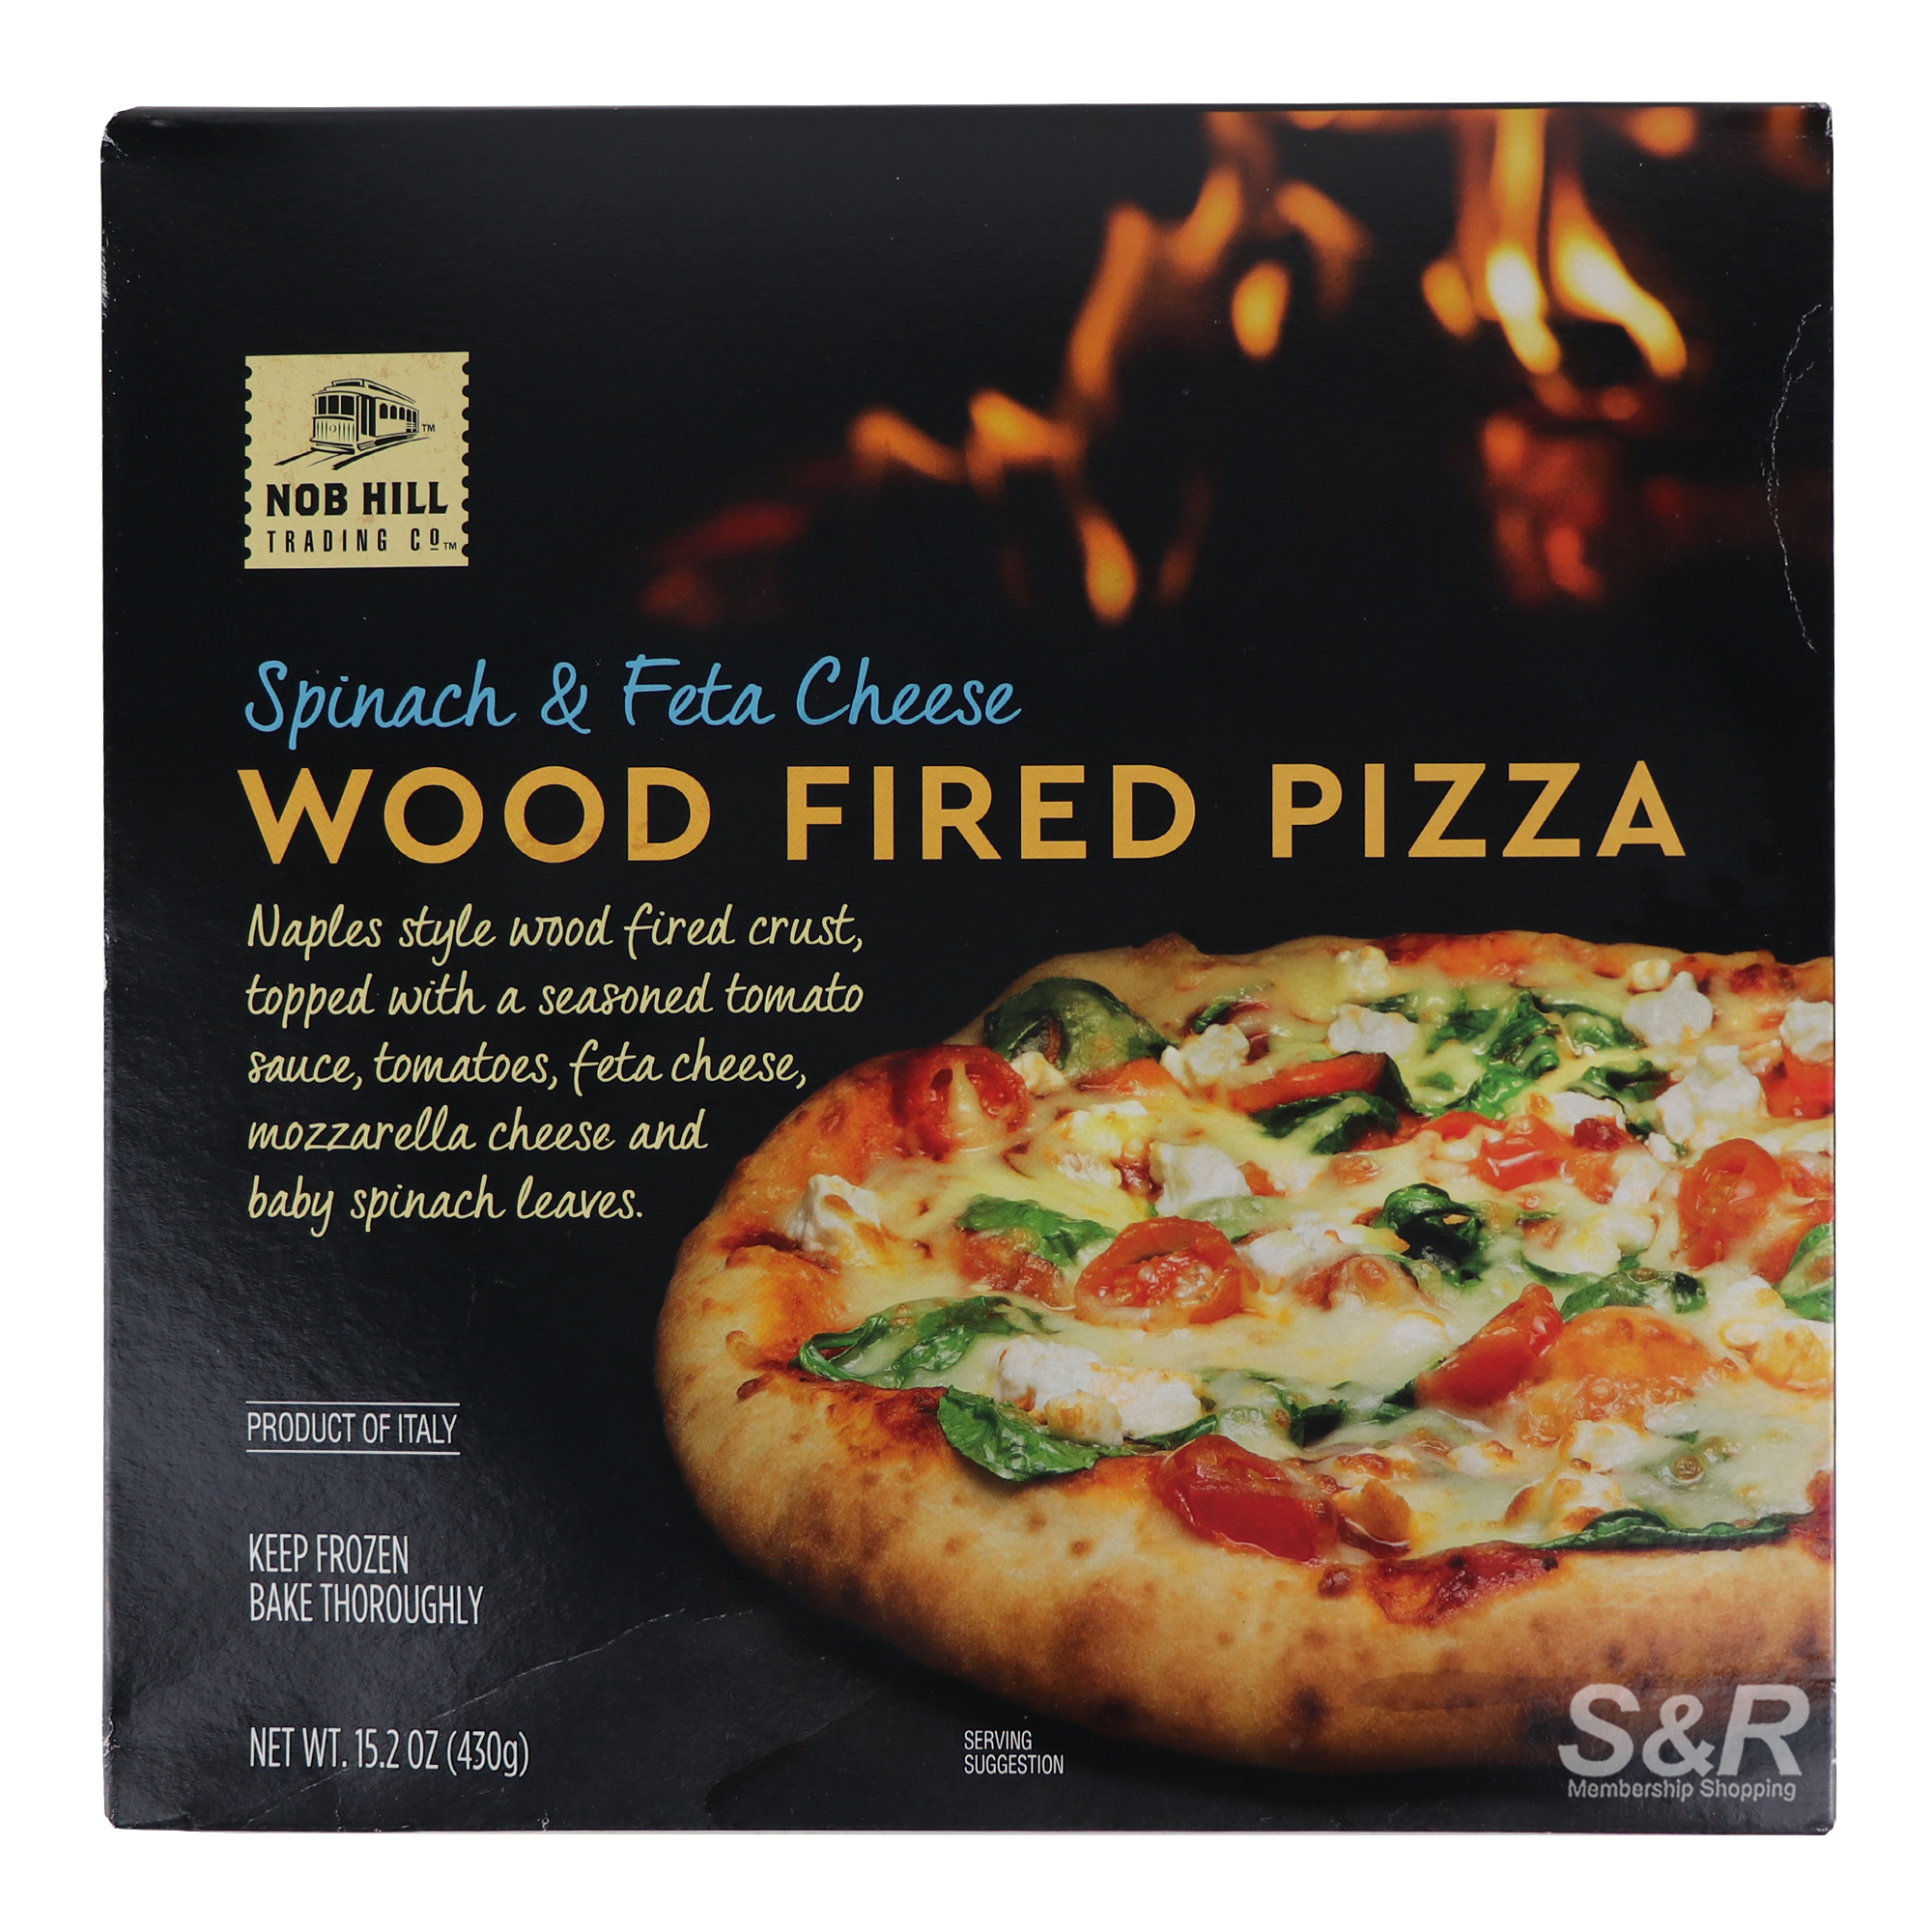 Nob Hill Trading Co. Spinach and Feta Cheese Wood Fired Pizza 430g